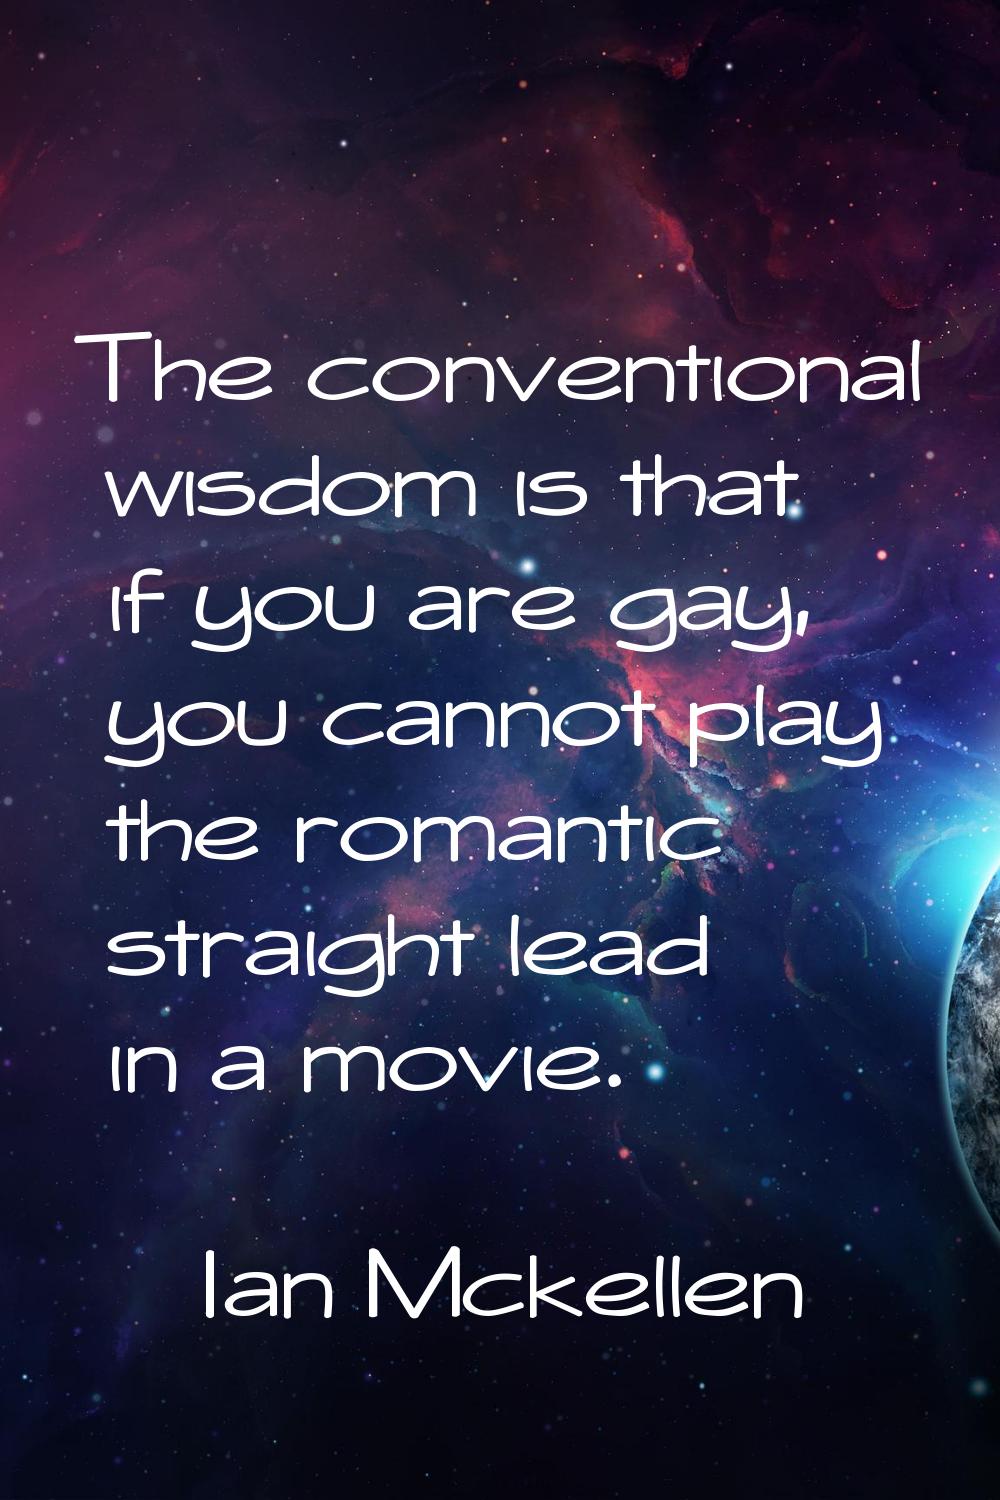 The conventional wisdom is that if you are gay, you cannot play the romantic straight lead in a mov